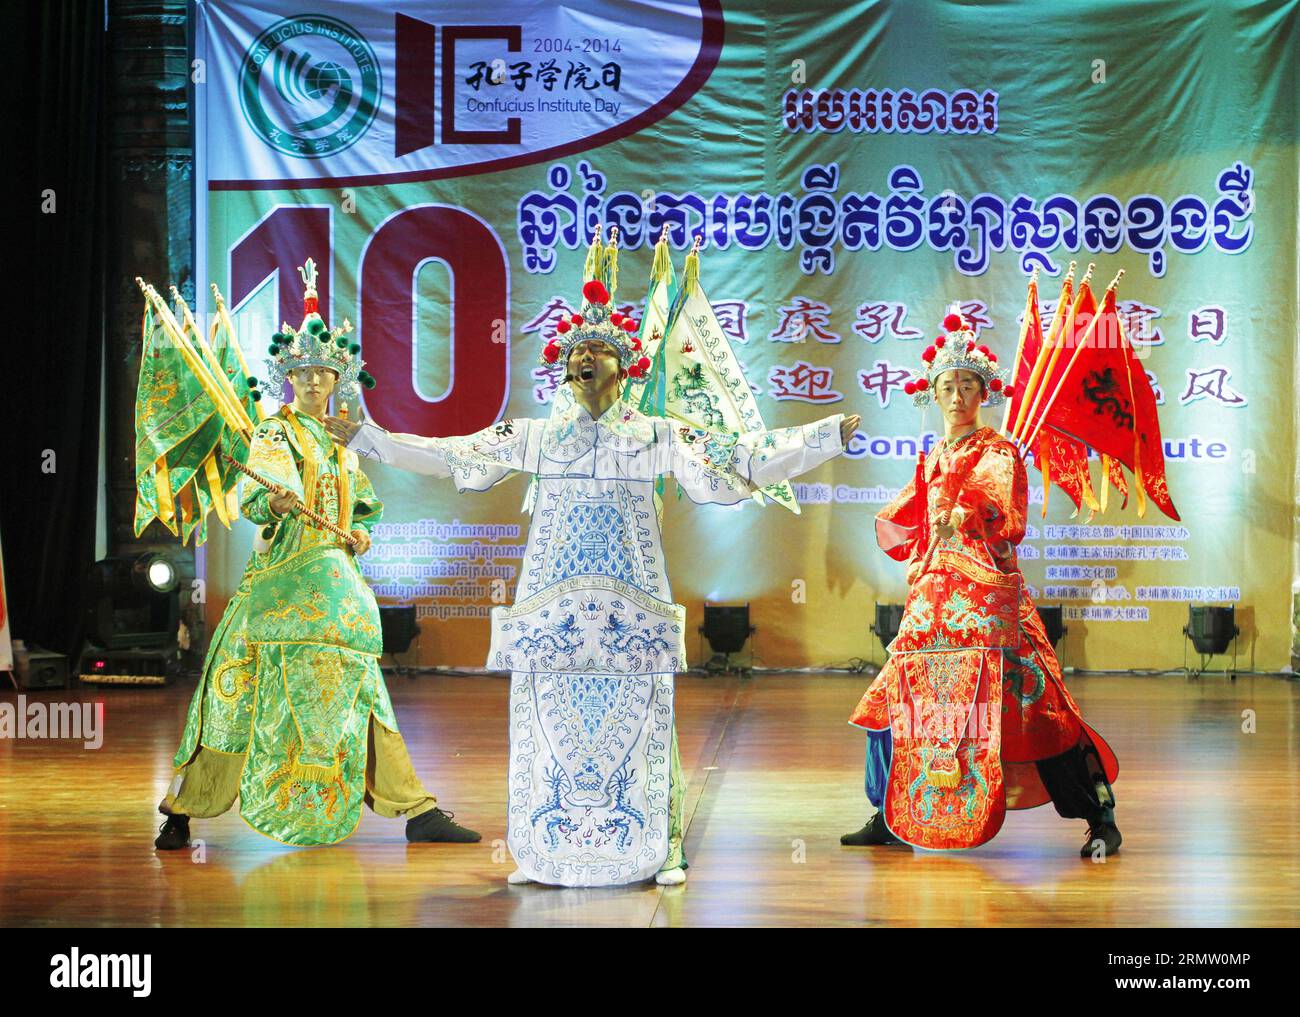 (140925) -- PHNOM PENH, Sept. 25, 2014 -- Chinese artists present performance during Confucius Institute Day celebrations at the Chaktomuk Theatre in Phnom Penh, Cambodia, on Sept. 25, 2014. A troupe of Chinese artists from Soochow University in Suzhou City of east China performed Chinese dances, songs and operas here on Thursday as part of the worldwide Confucius Institute Day celebrations, which marks the 10th anniversary of the establishment of Confucius Institute. ) CAMBODIA-PHNOM PENH-CHINA-CONFUCIUS INSTITUTE DAY-CELEBRATION Sovannara PUBLICATIONxNOTxINxCHN   Phnom Penh Sept 25 2014 Chin Stock Photo